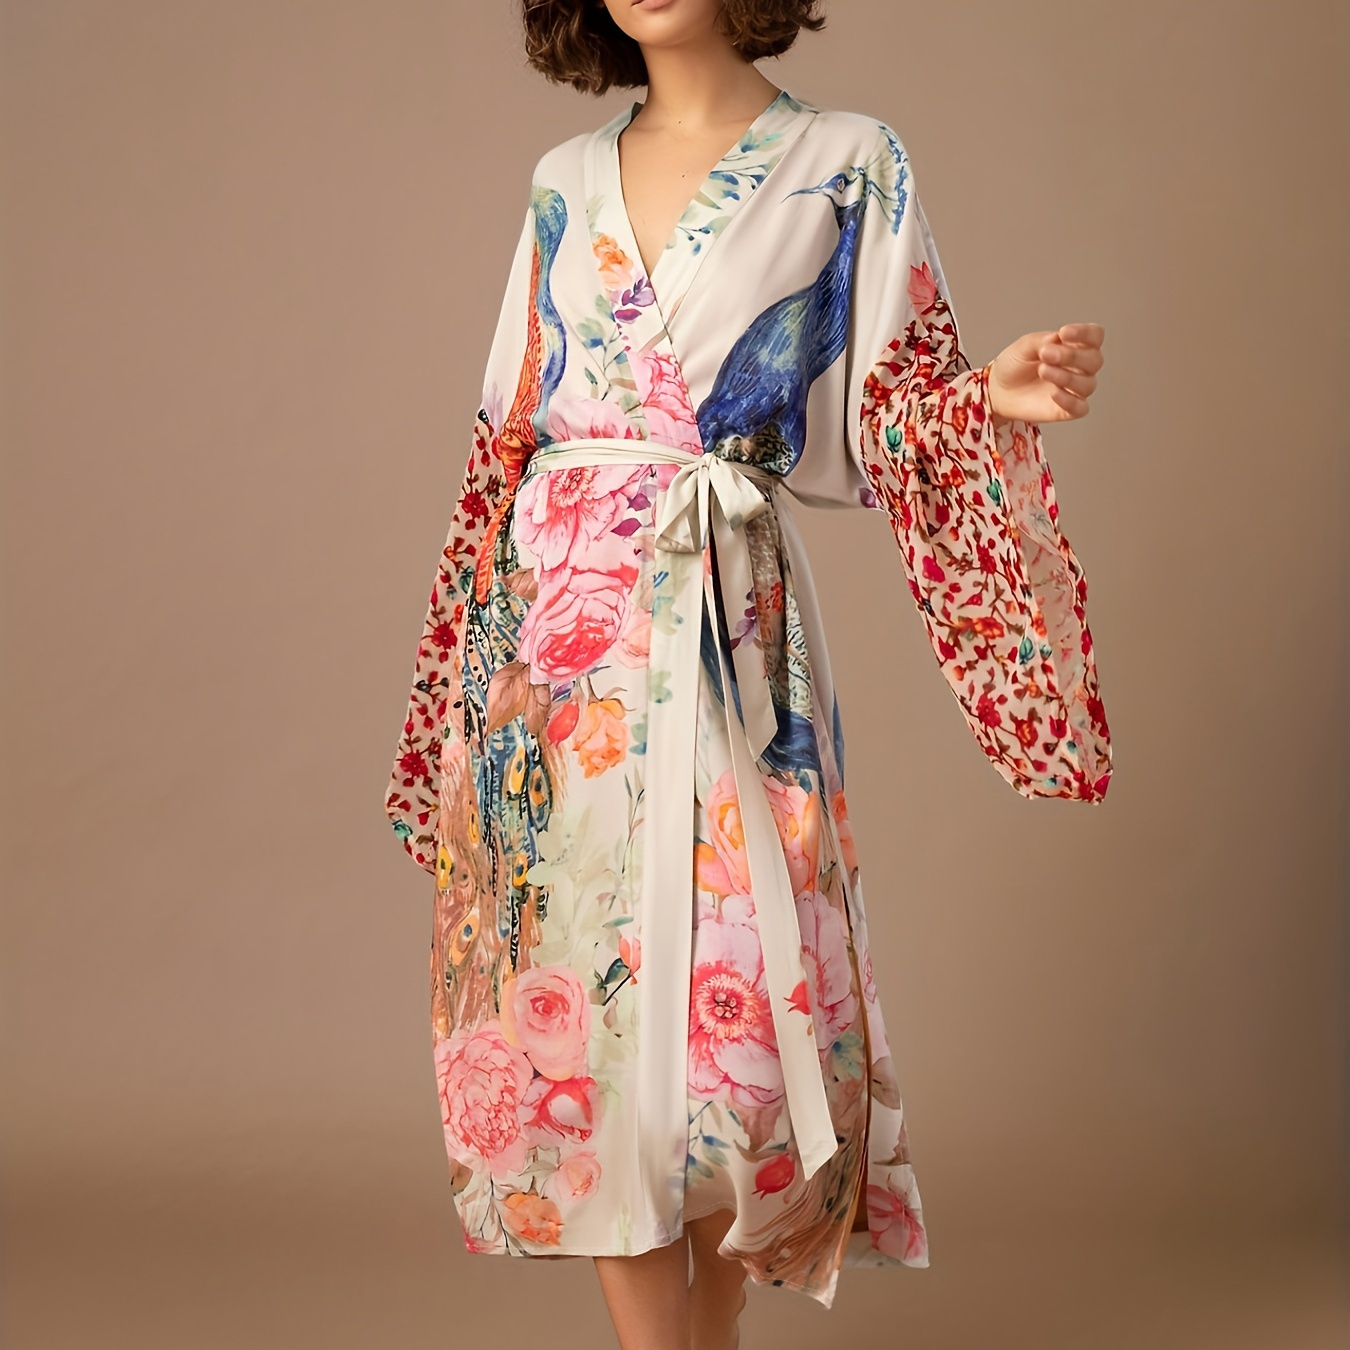 

Floral Peacock Print Cover Up Kimono, Long Sleeves Loose With Waistband Robes, Women's Swimwear & Clothing